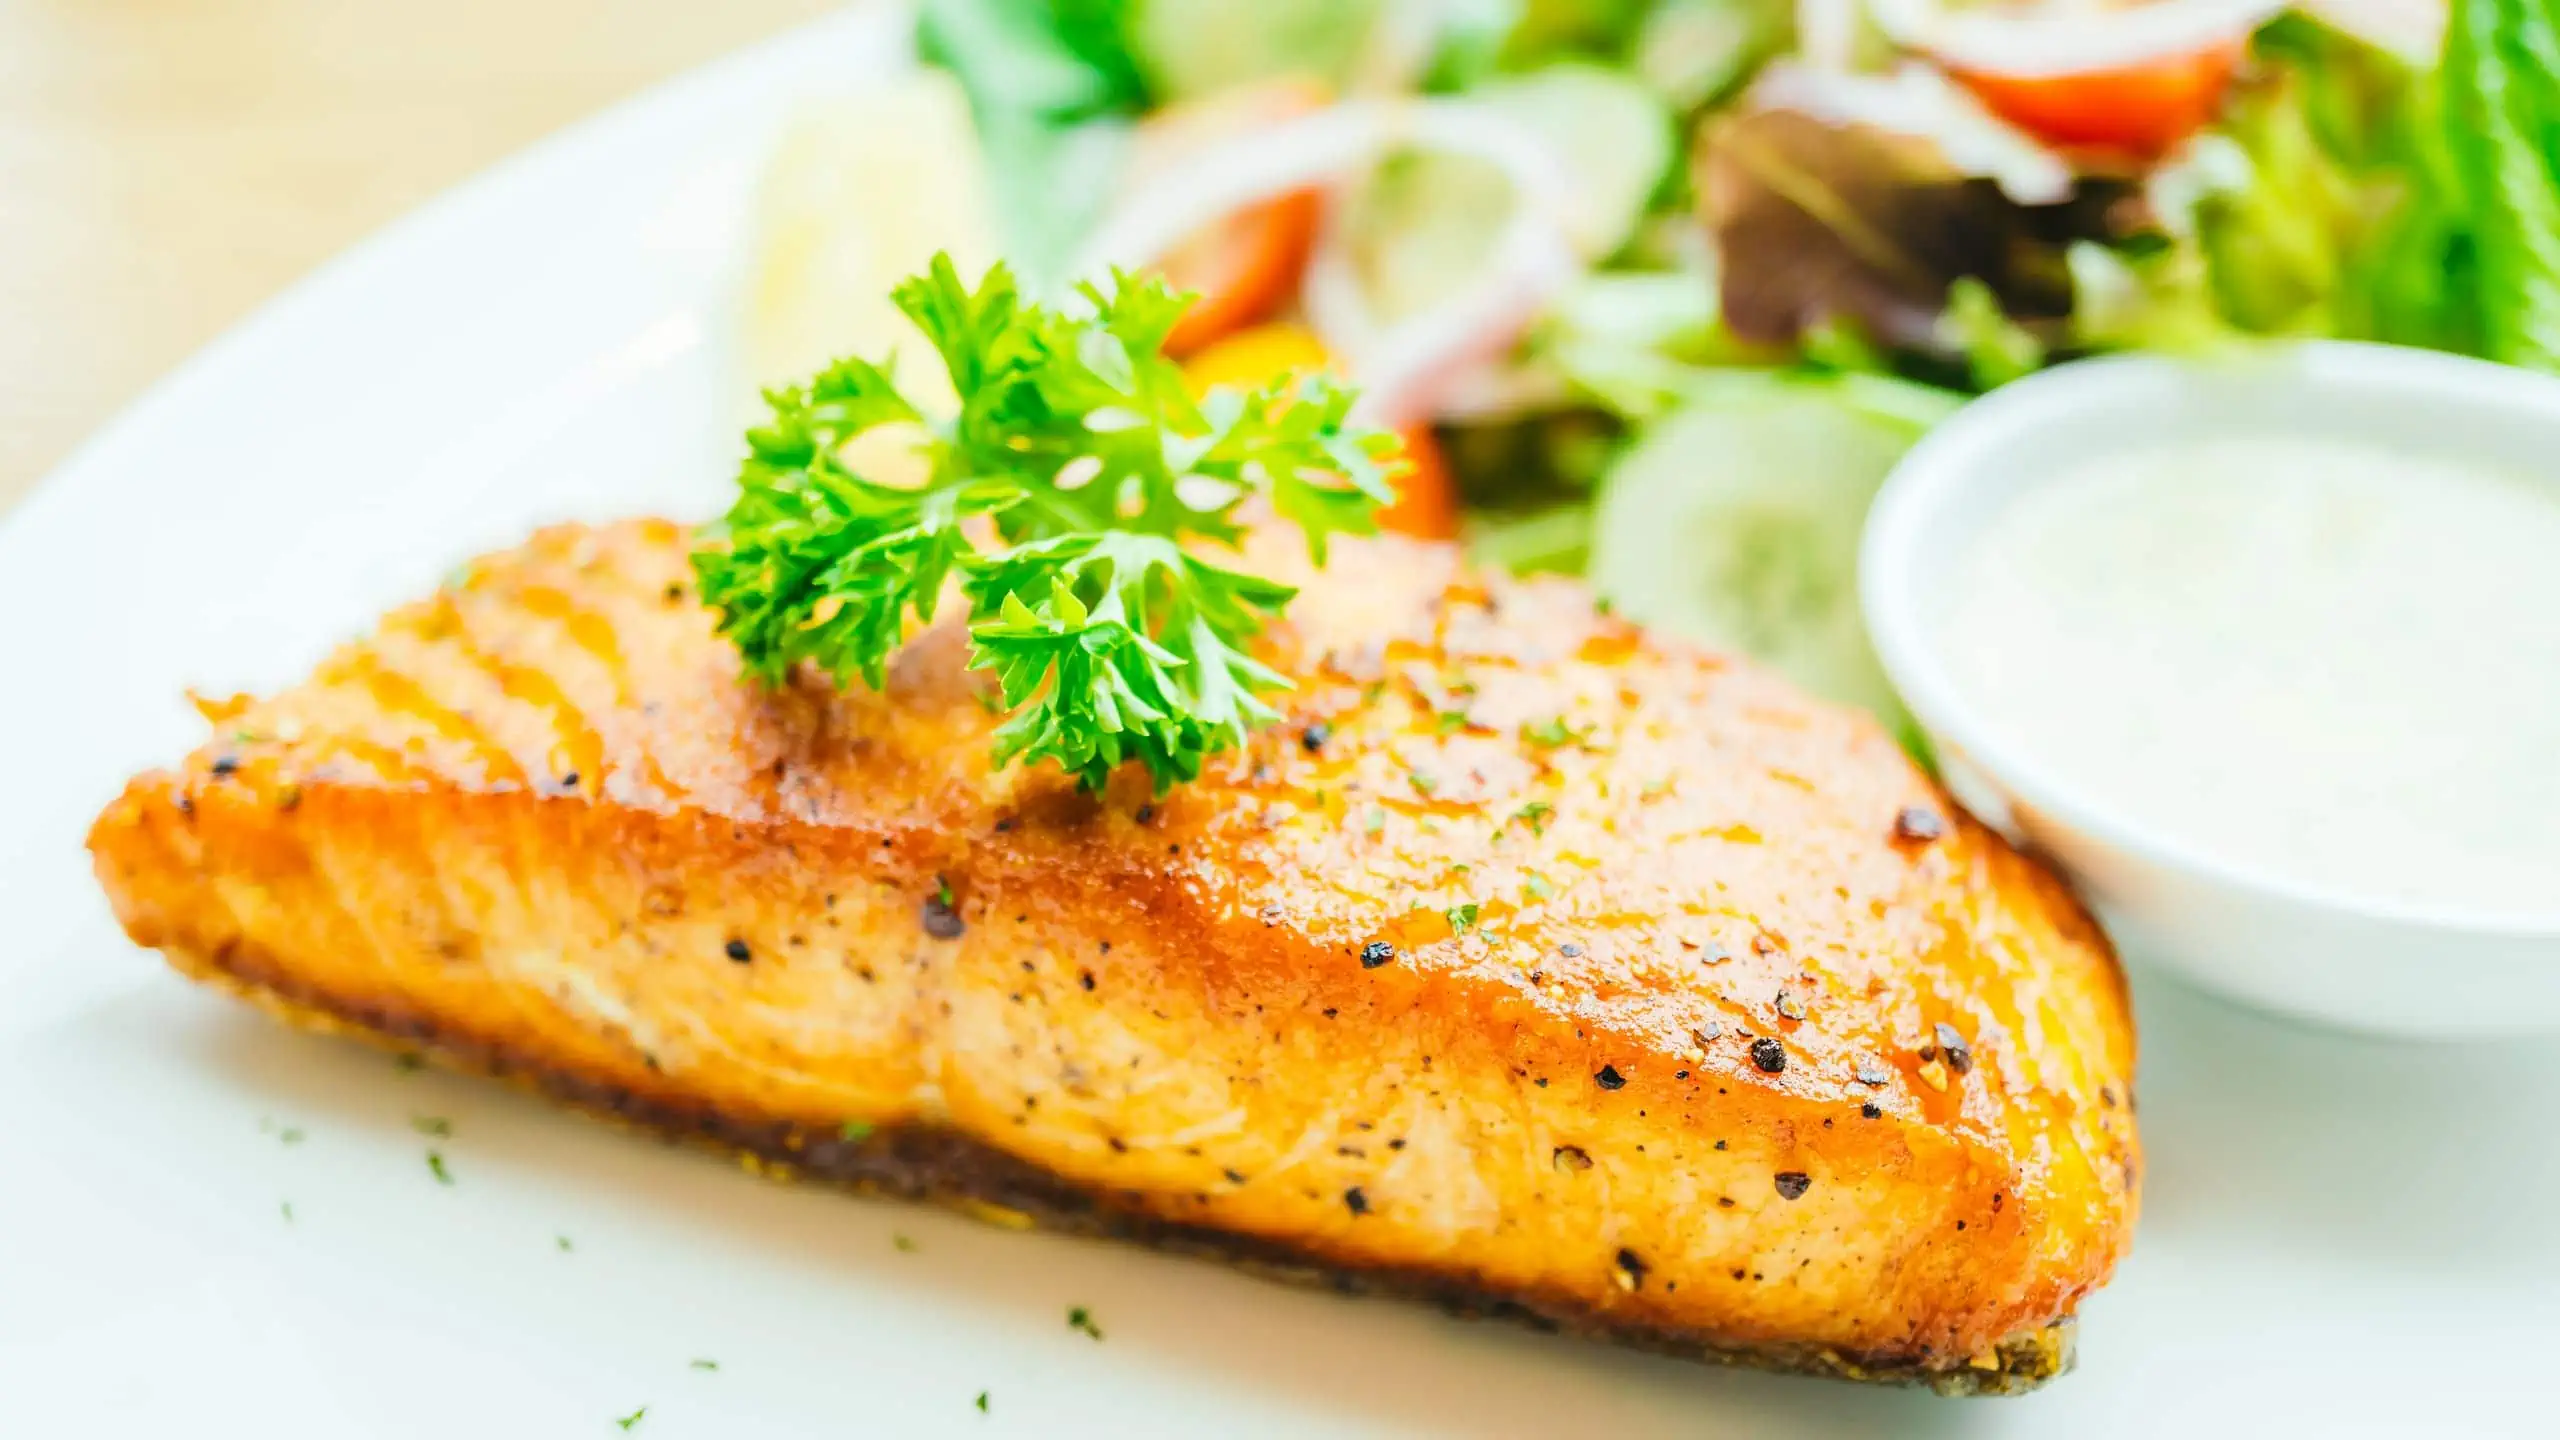 Our version of Longhorn's salmon recipe